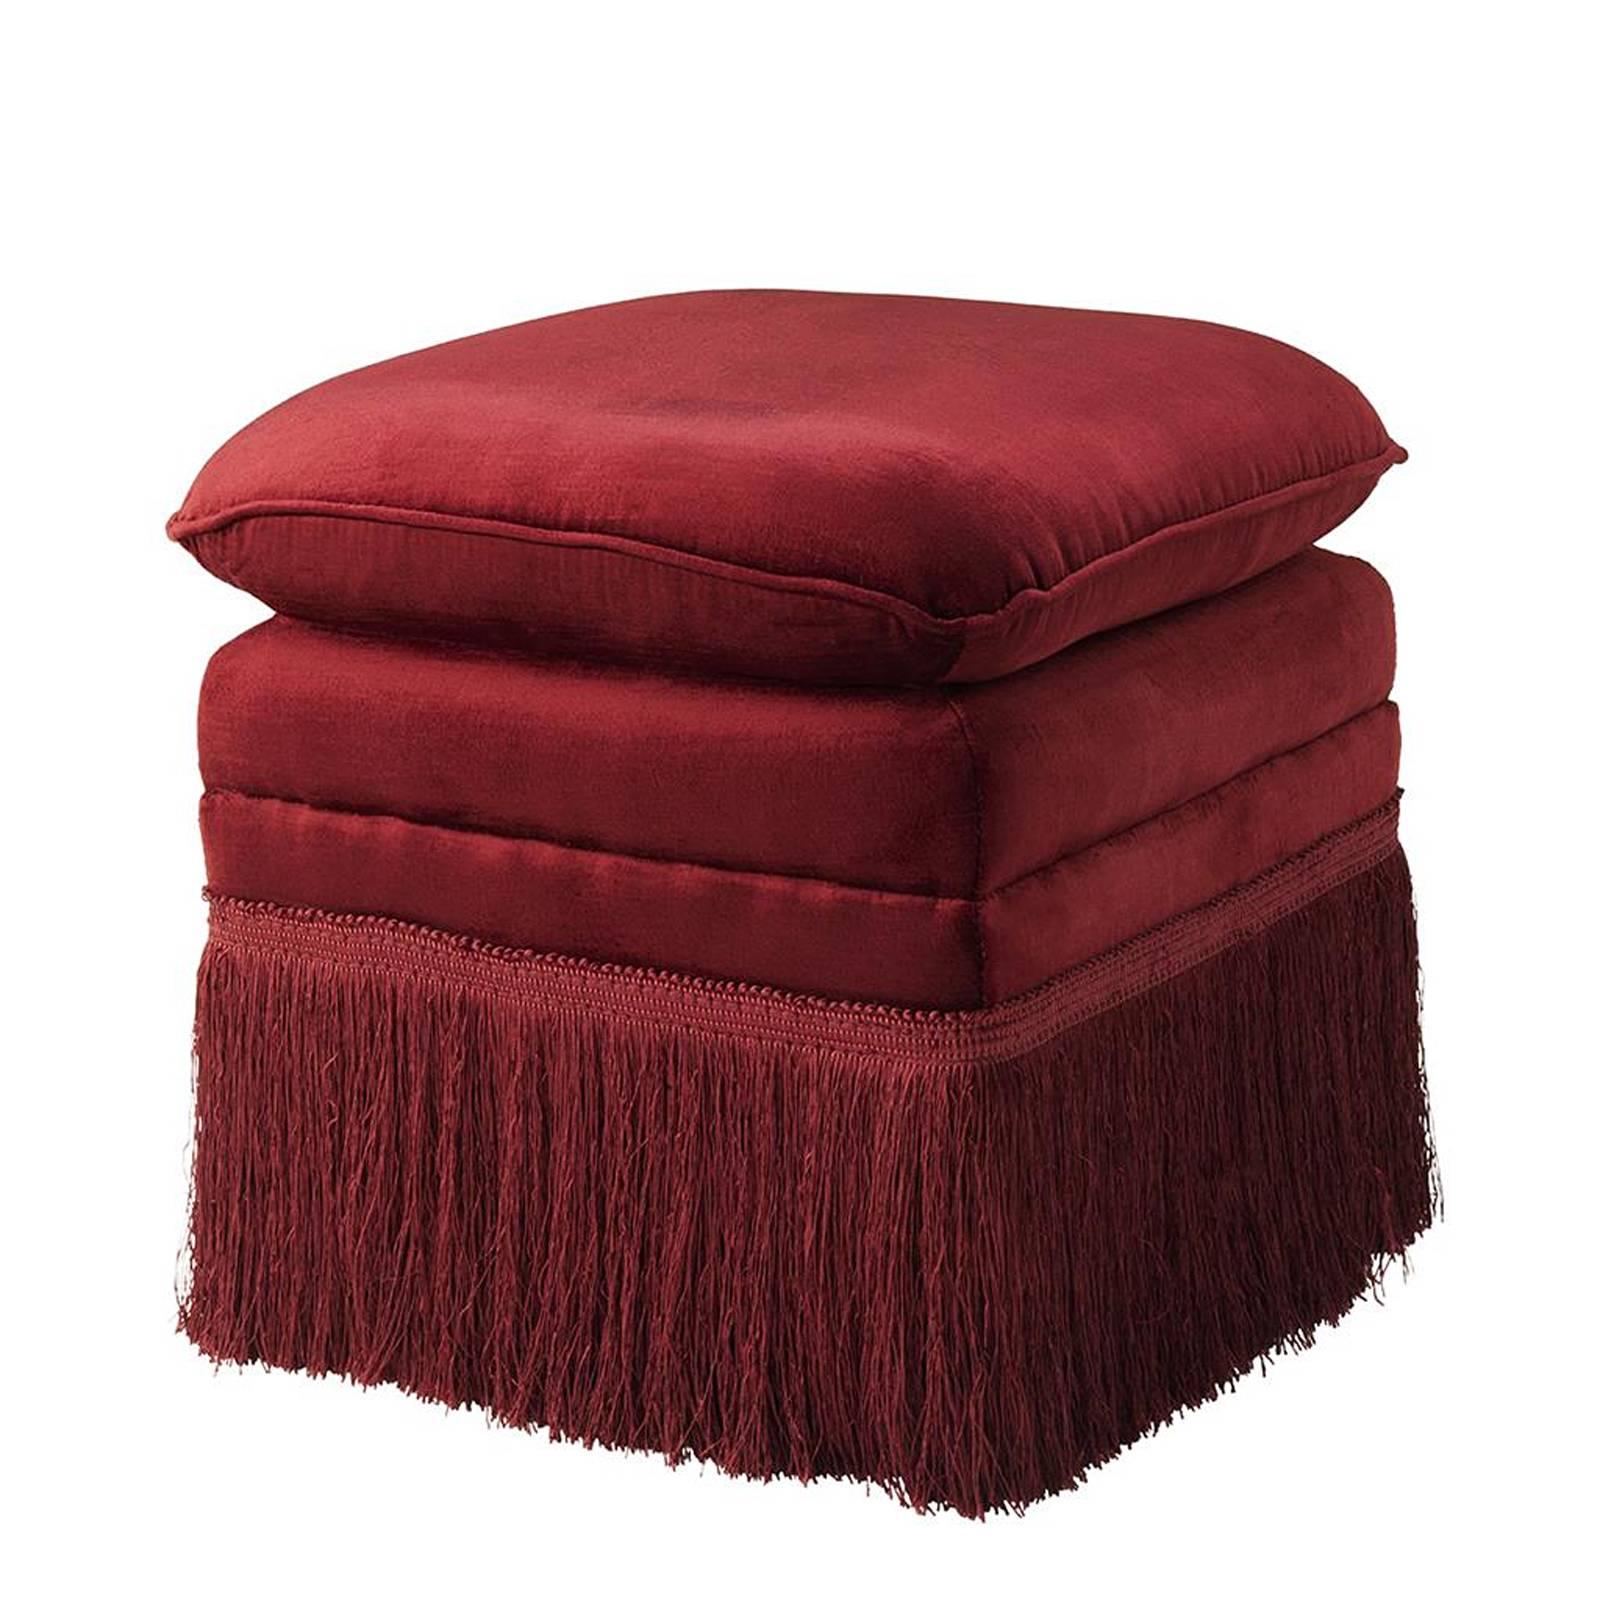 Palace Stool in Red or Black or Blue Essex Fabric with Fringe